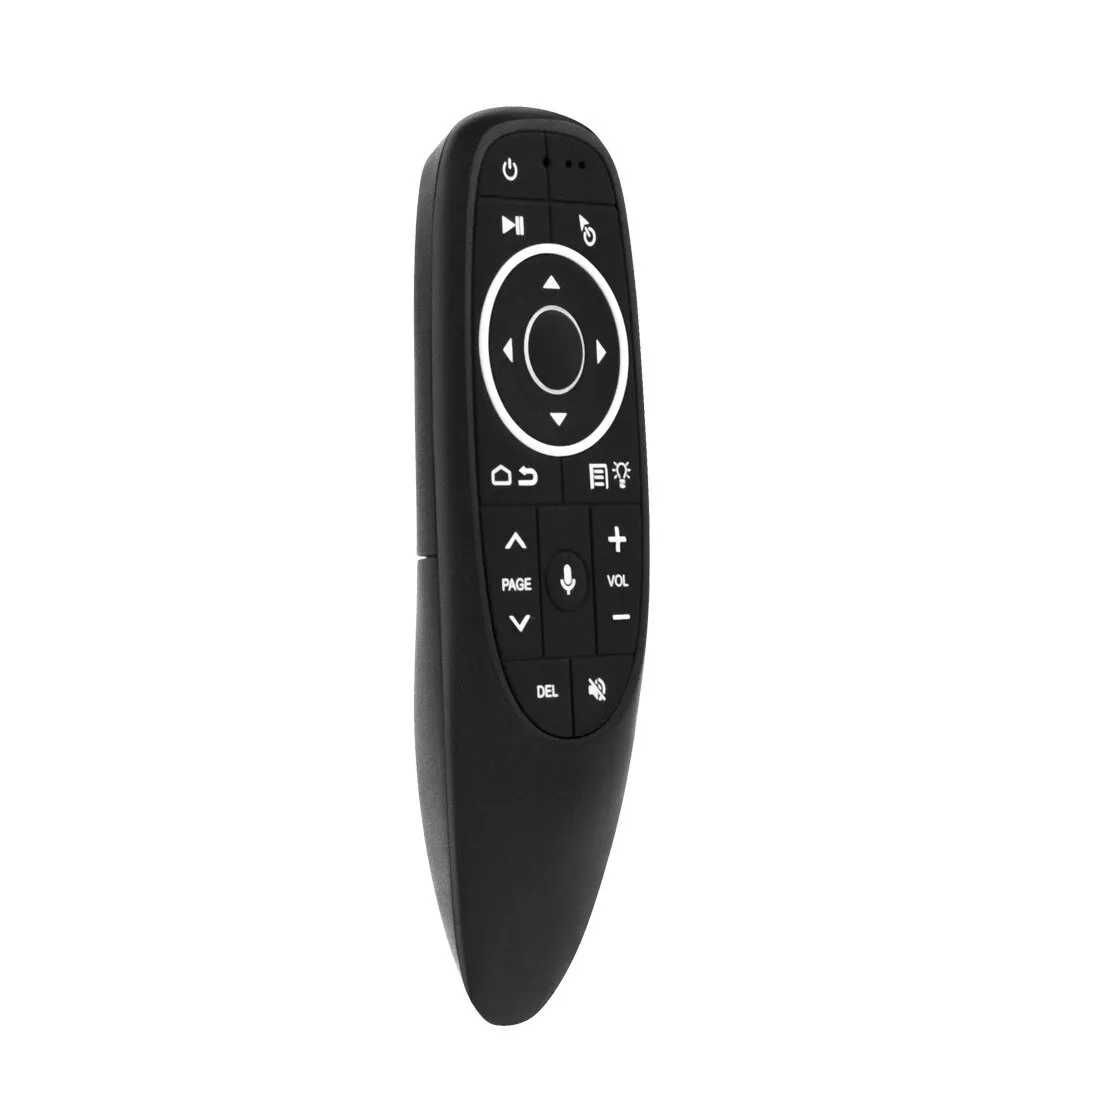 G10S Pro Air Mouse Voice Remote Control 2.4GHz Пульт Gyroscope IR